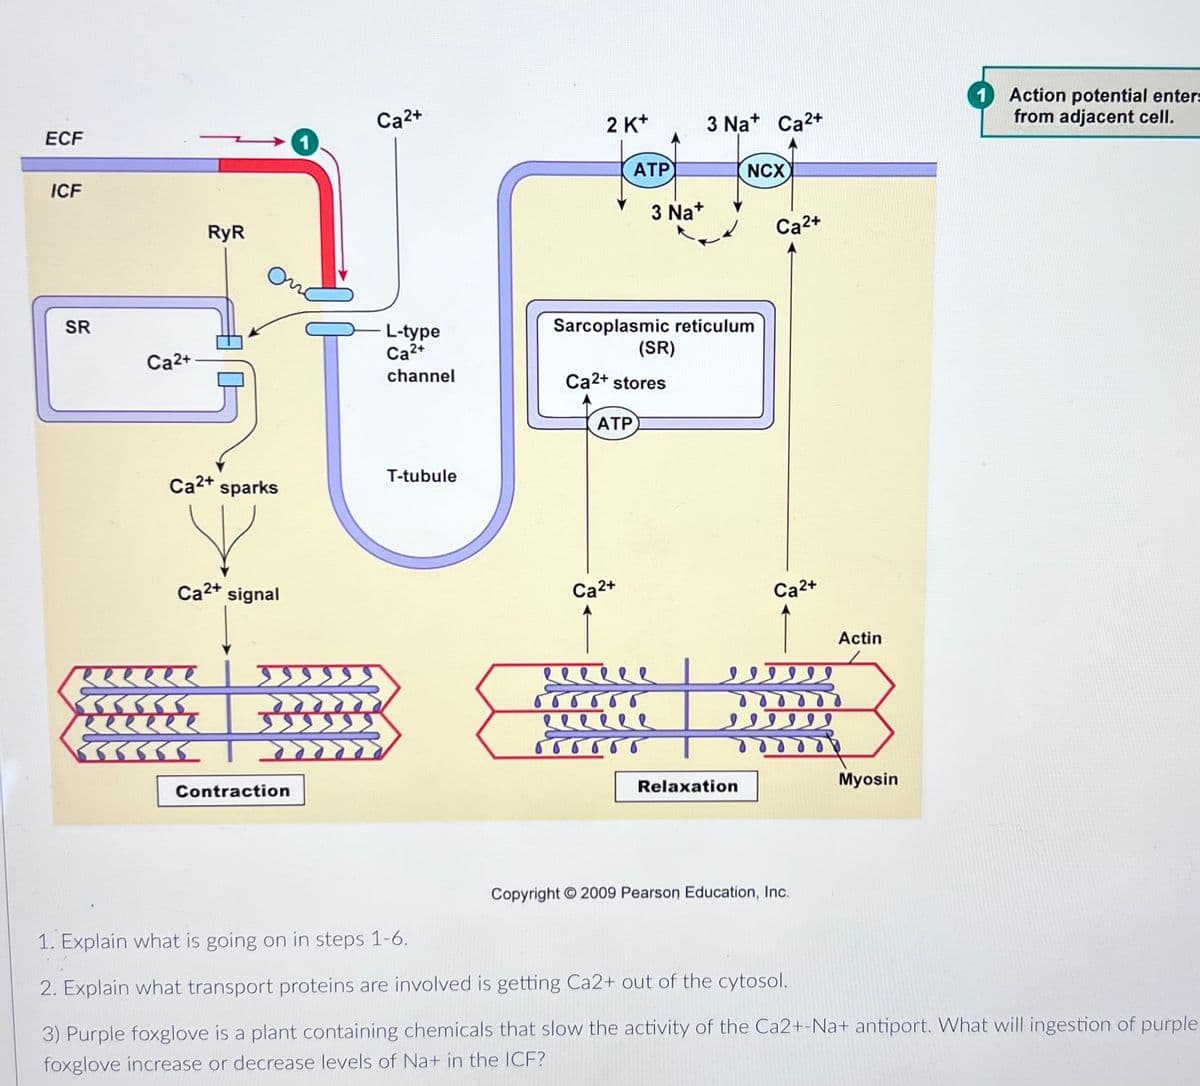 Action potential enters
from adjacent cell.
Ca2+
2 K*
3 Na+ Ca2+
ECF
ATP
NCX
ICF
3 Na+
RyR
Ca2+
Sarcoplasmic reticulum
(SR)
SR
L-type
Ca2+
Ca2+
channel
Ca2+ stores
ATP
T-tubule
Ca2+ sparks
Ca2+ signal
Ca2+
Ca2+
Actin
eereee
33335
Myosin
Contraction
Relaxation
Copyright 2009 Pearson Education, Inc.
1. Explain what is going on in steps 1-6.
2. Explain what transport proteins are involved is getting Ca2+ out of the cytosol.
3) Purple foxglove is a plant containing chemicals that slow the activity of the Ca2+-Na+ antiport. What will ingestion of purple
foxglove increase or decrease levels of Na+ in the ICF?
